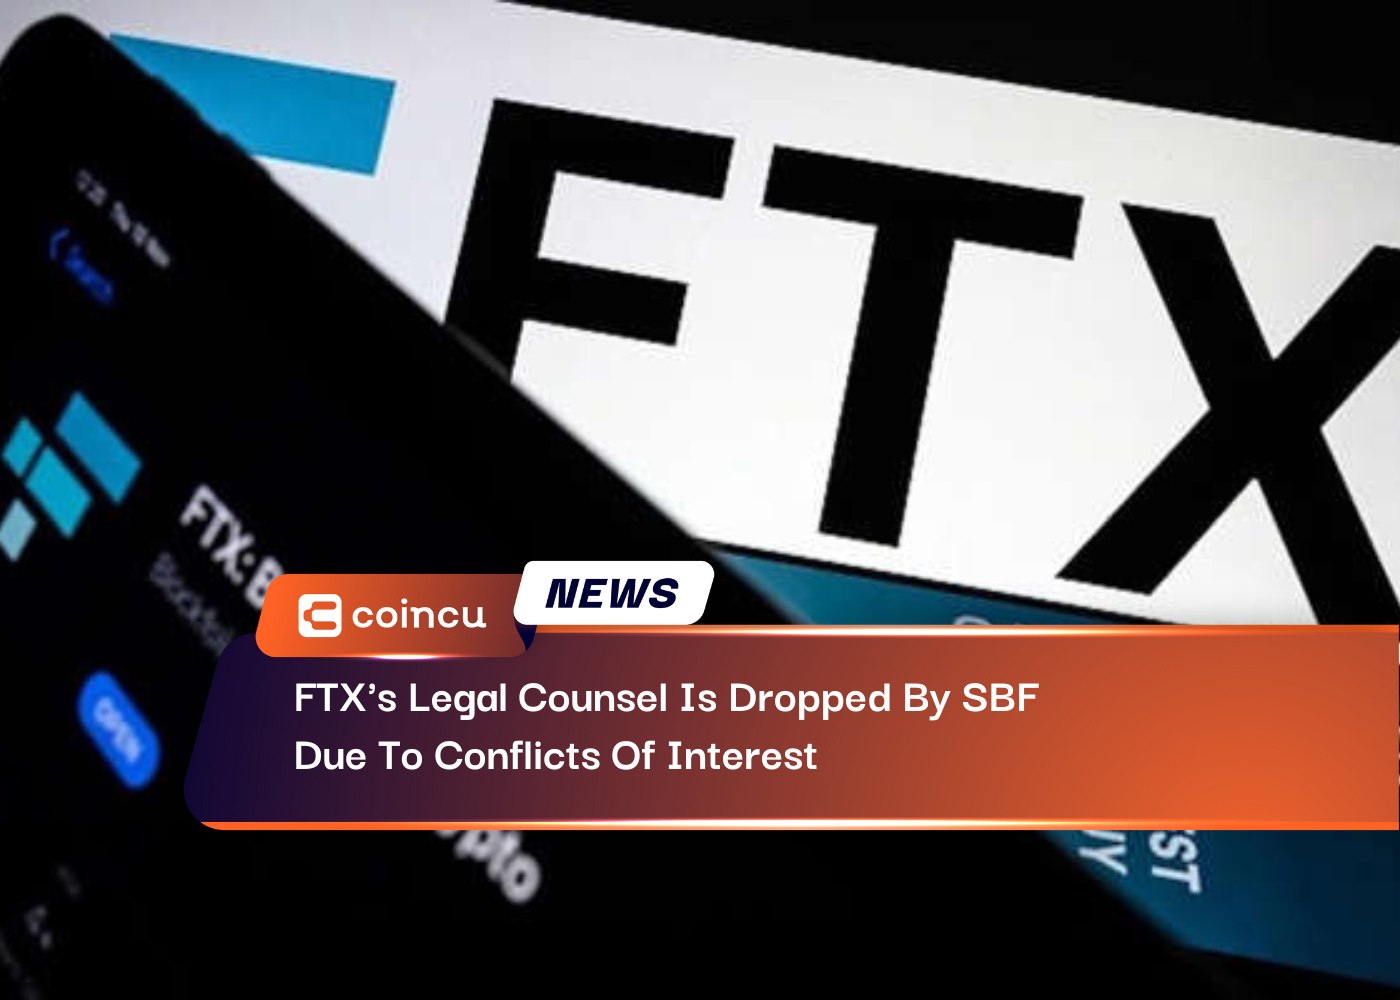 FTXs Legal Counsel Is Dropped By SBF